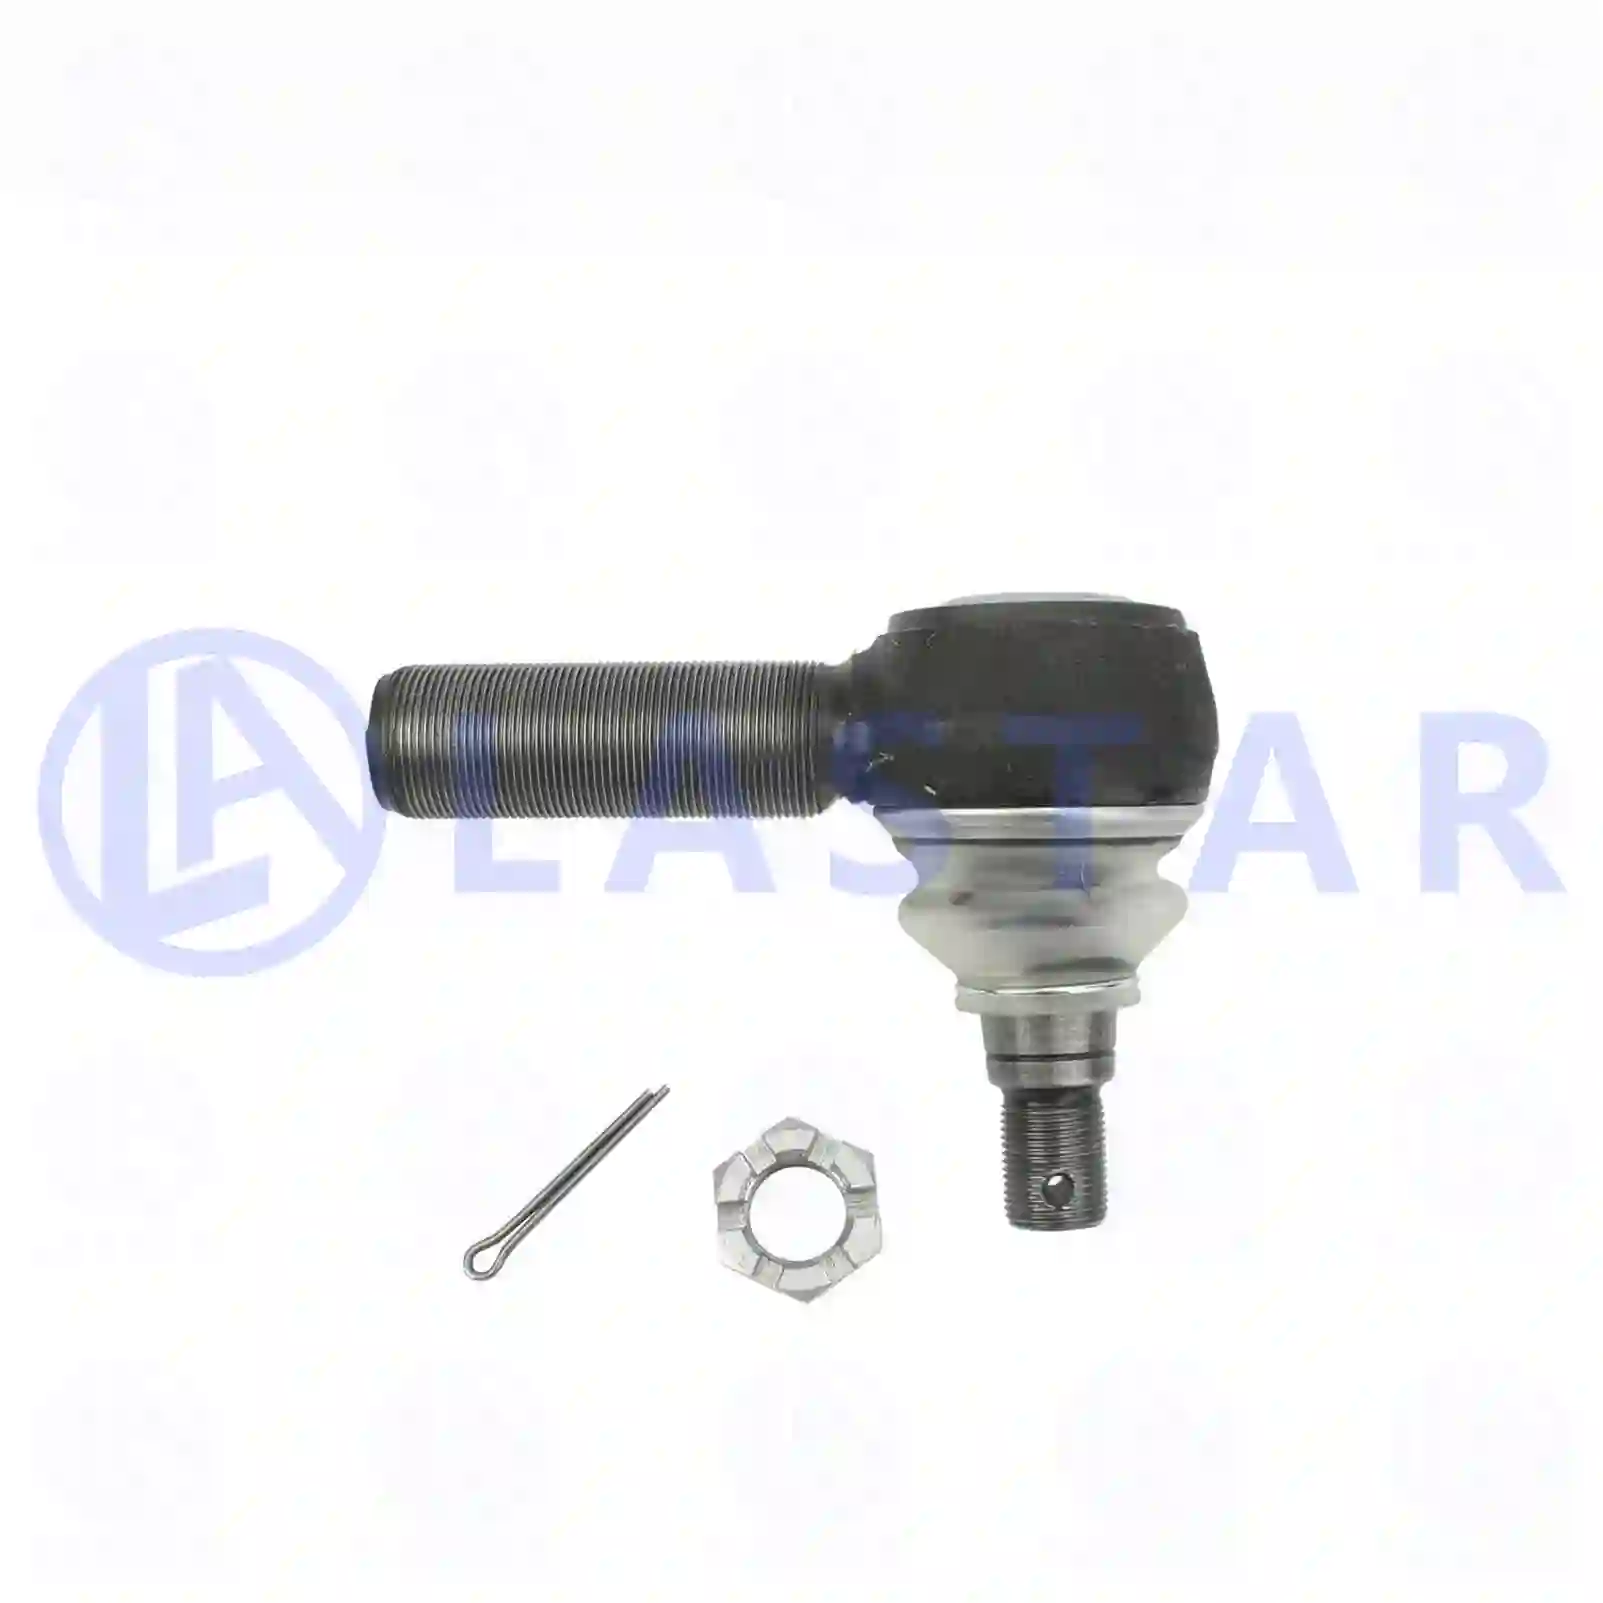 Ball joint, left hand thread, 77706024, 1505758, 1507822, 1698533, 1698847, 3090728, 3092471, 3110001, 366757, 3988968, 6884001, 6889478, 85114149, ZG40347-0008 ||  77706024 Lastar Spare Part | Truck Spare Parts, Auotomotive Spare Parts Ball joint, left hand thread, 77706024, 1505758, 1507822, 1698533, 1698847, 3090728, 3092471, 3110001, 366757, 3988968, 6884001, 6889478, 85114149, ZG40347-0008 ||  77706024 Lastar Spare Part | Truck Spare Parts, Auotomotive Spare Parts